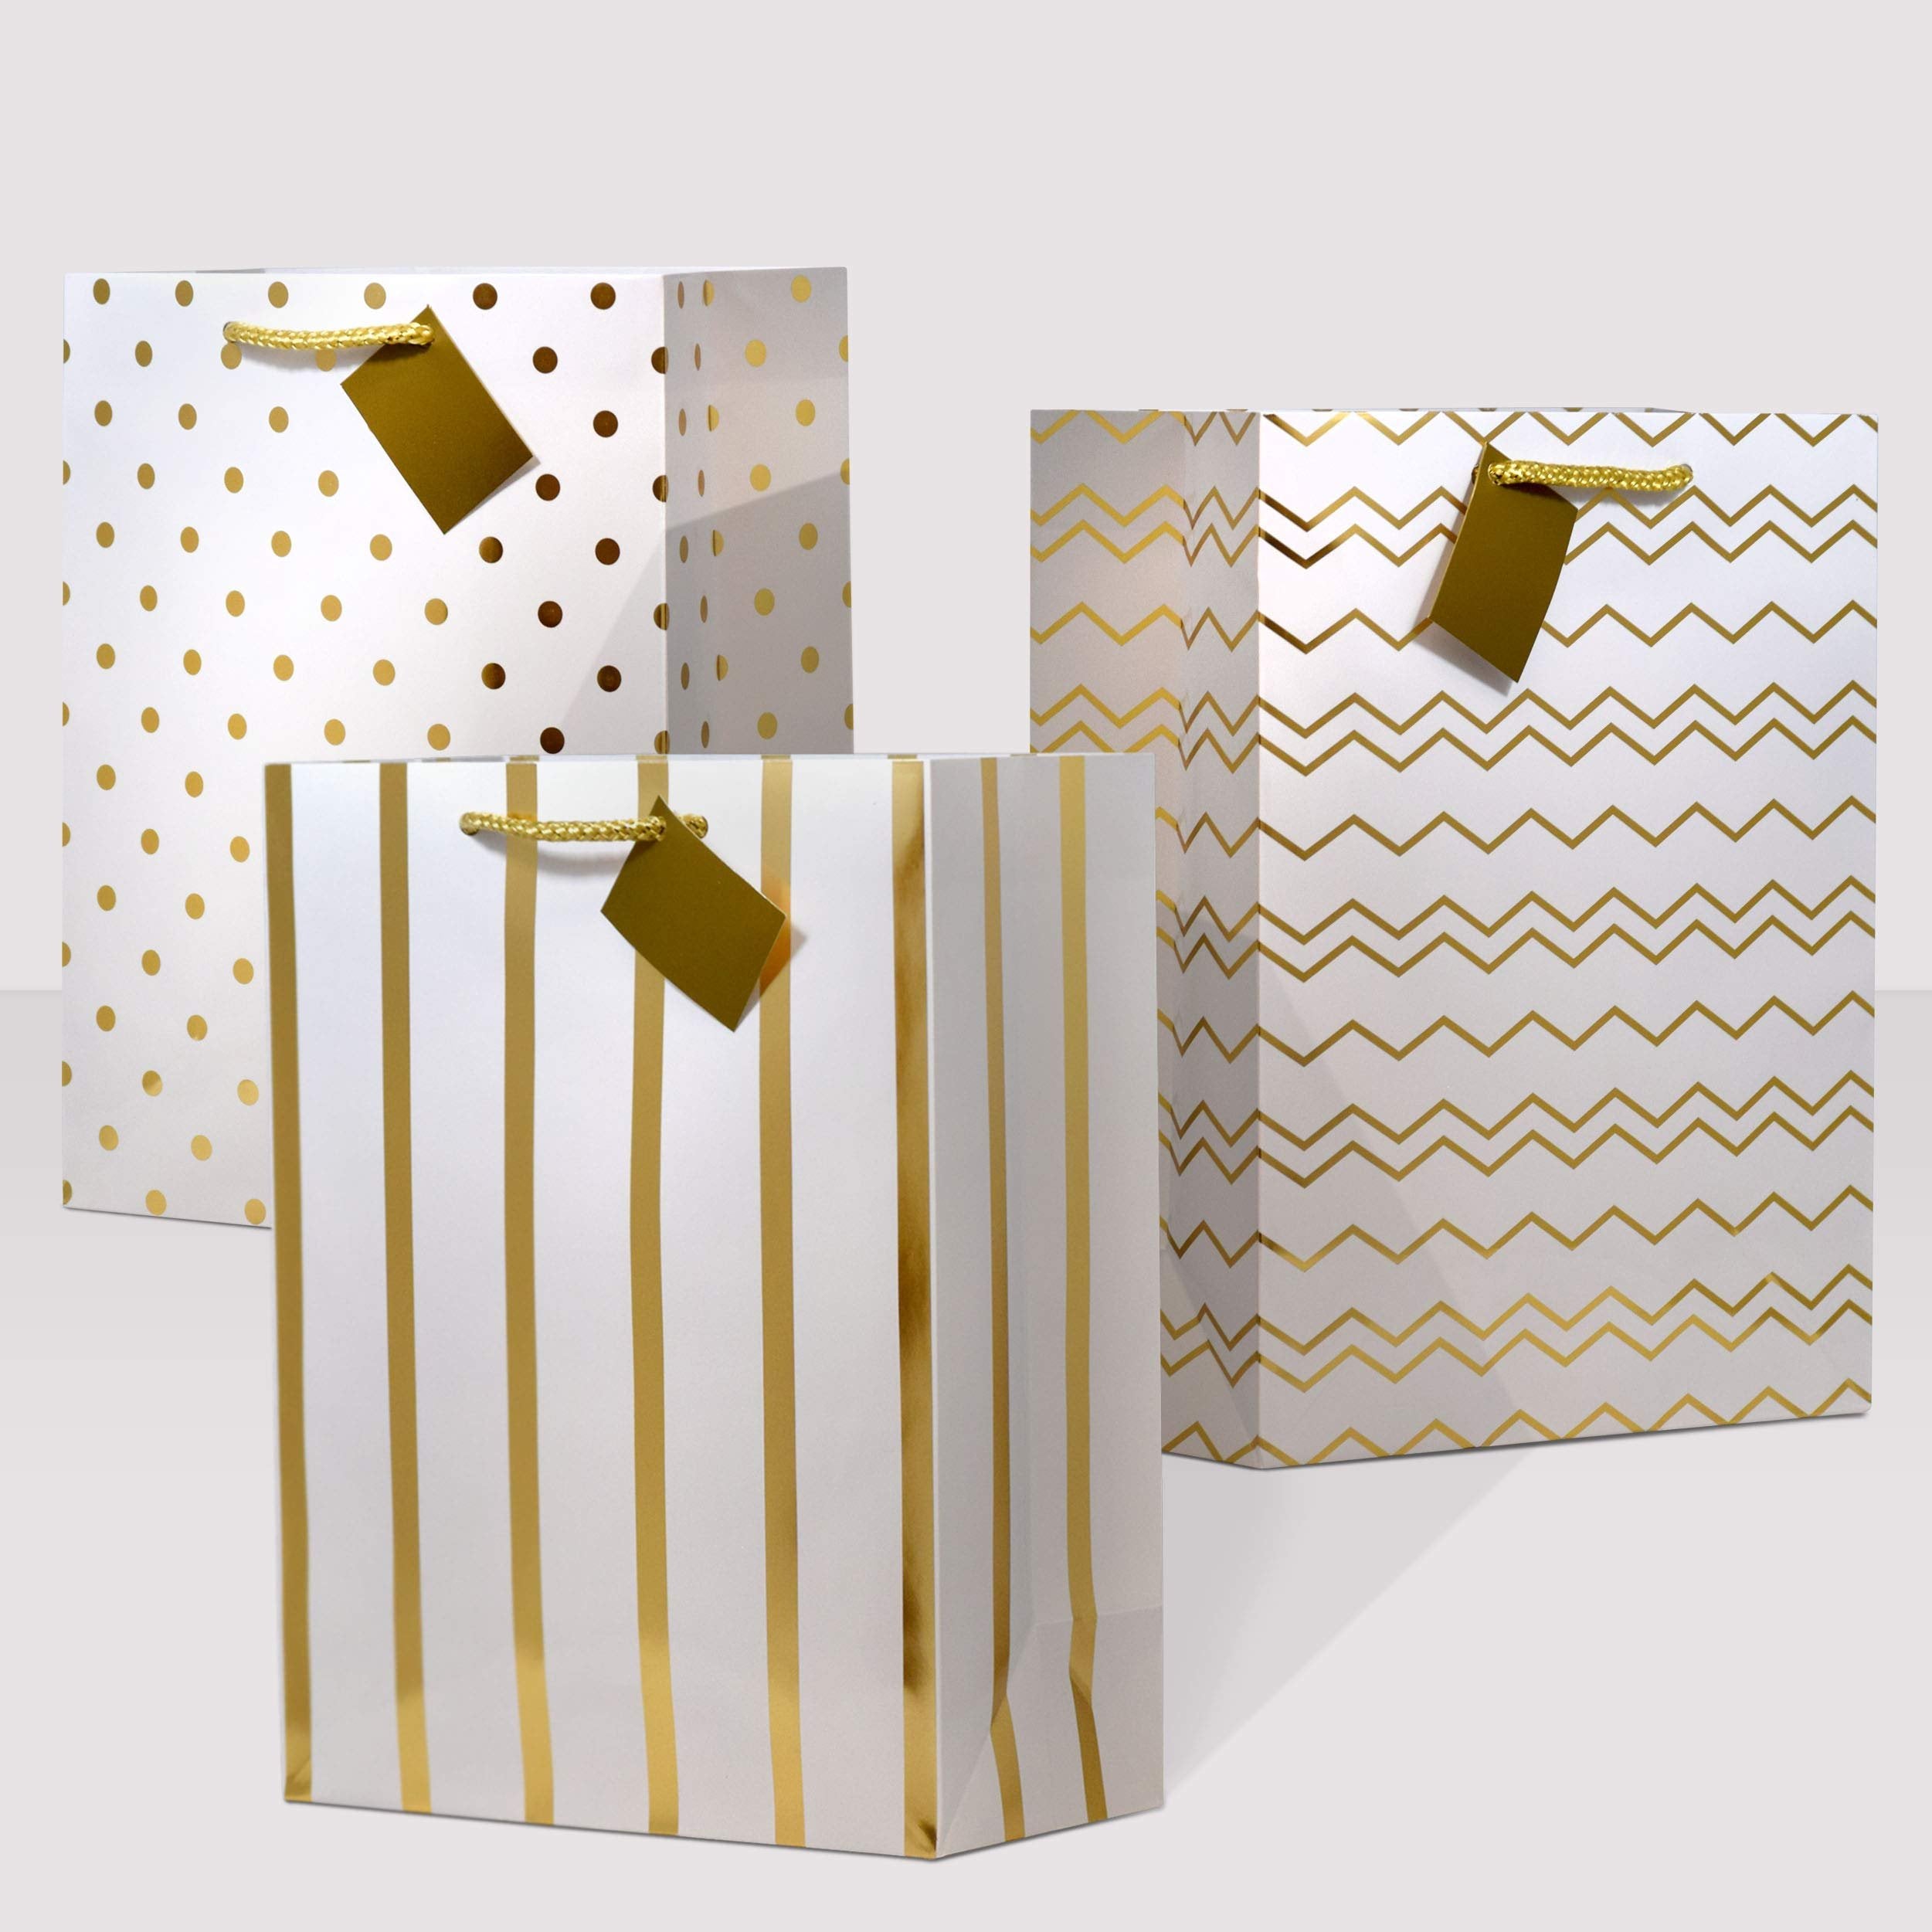 Gold Gift Bags - 12 Pack Large Metallic Designer Paper Bags with Handles, Fancy Gift Wrap Eurto Totes with Polka Dot, Chevron, Stripe Pattern for Birthdays, Party Favors, Holidays, Christmas, Bulk - 10x5x13